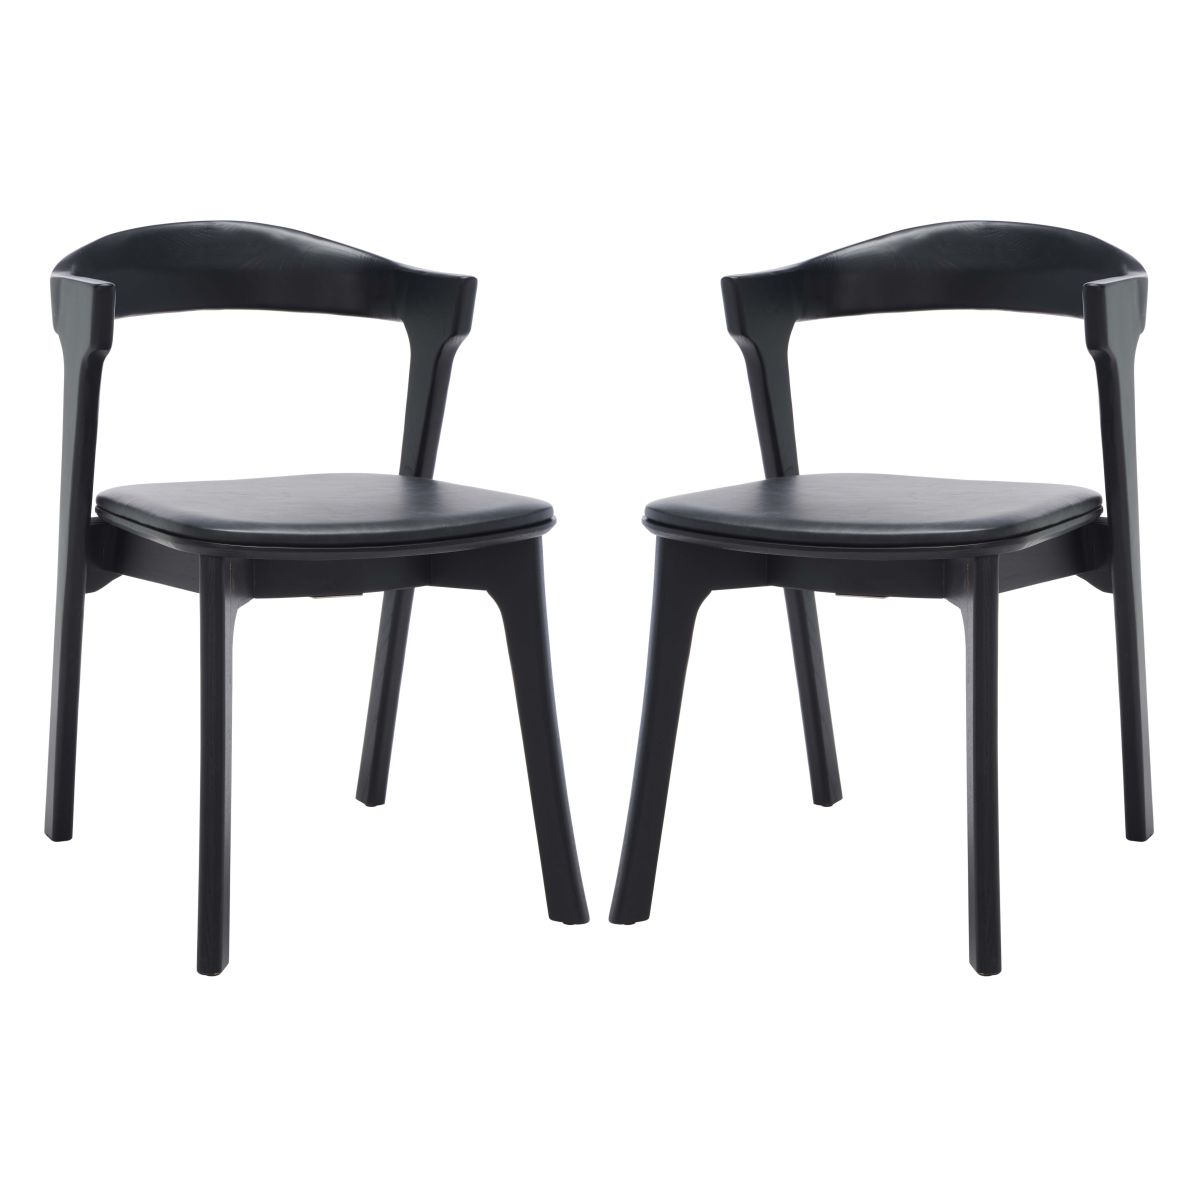 Safavieh Couture Brylie Wood And Leather Dining Chair(Set of 2) , SFV4126 - Black